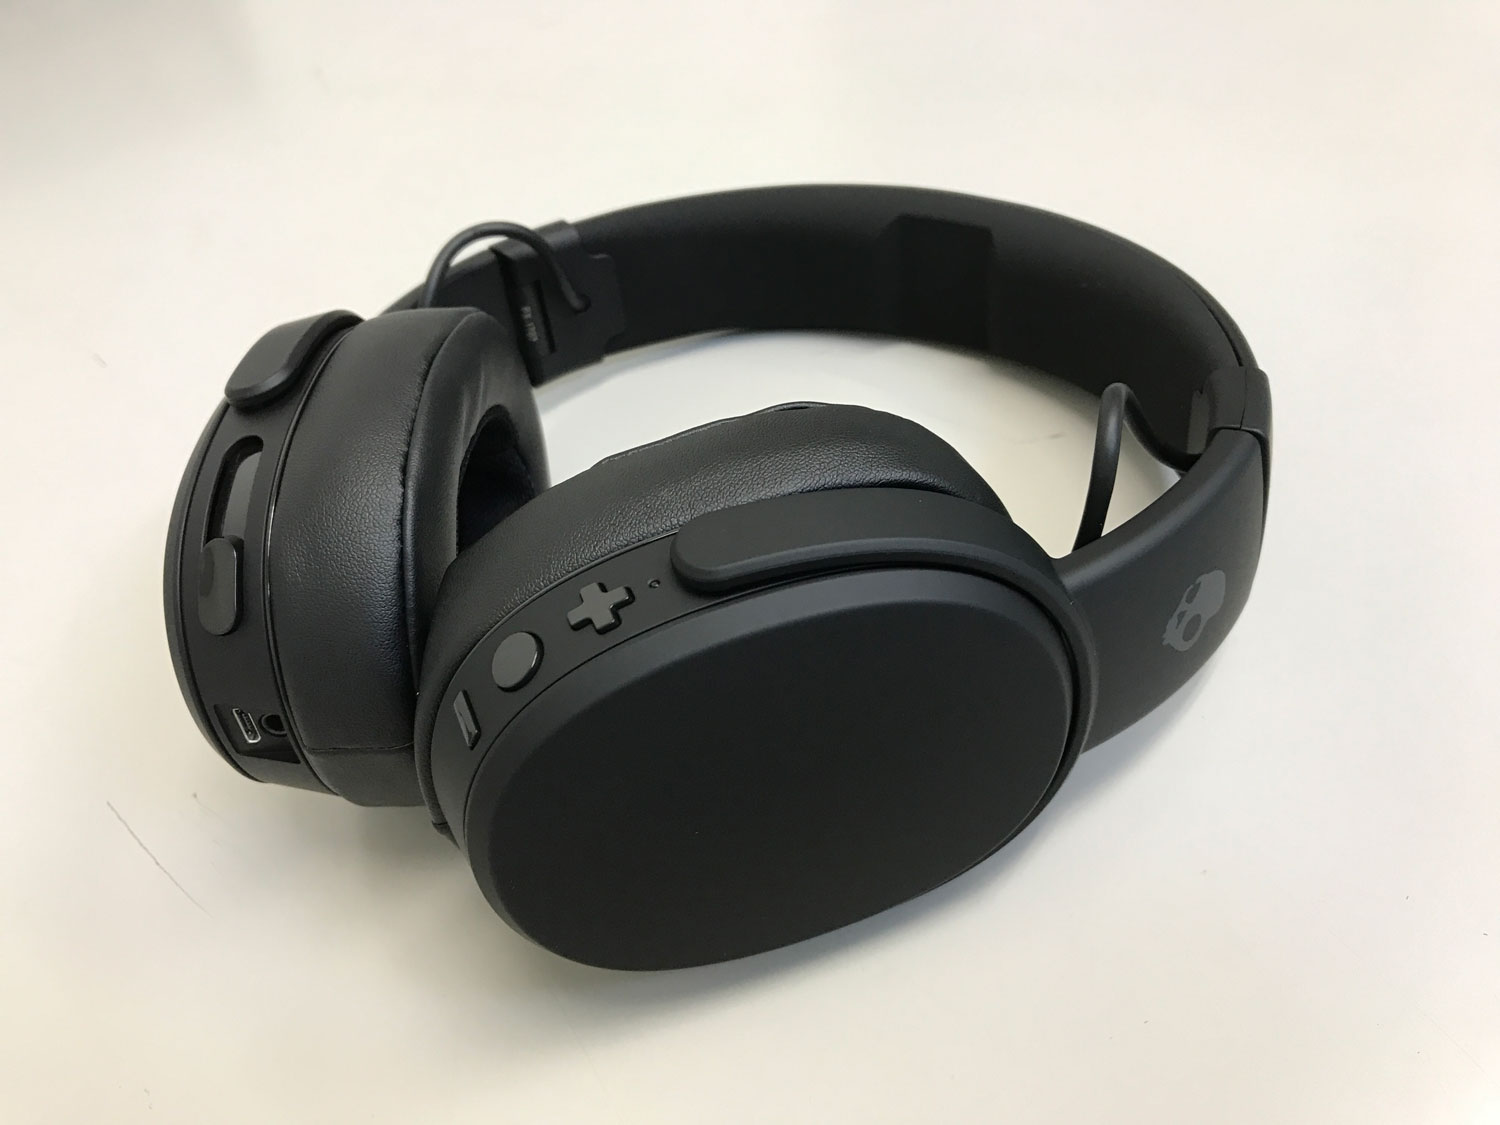 The center at the rear of the right ear cup is equipped with pairing and volume operation buttons